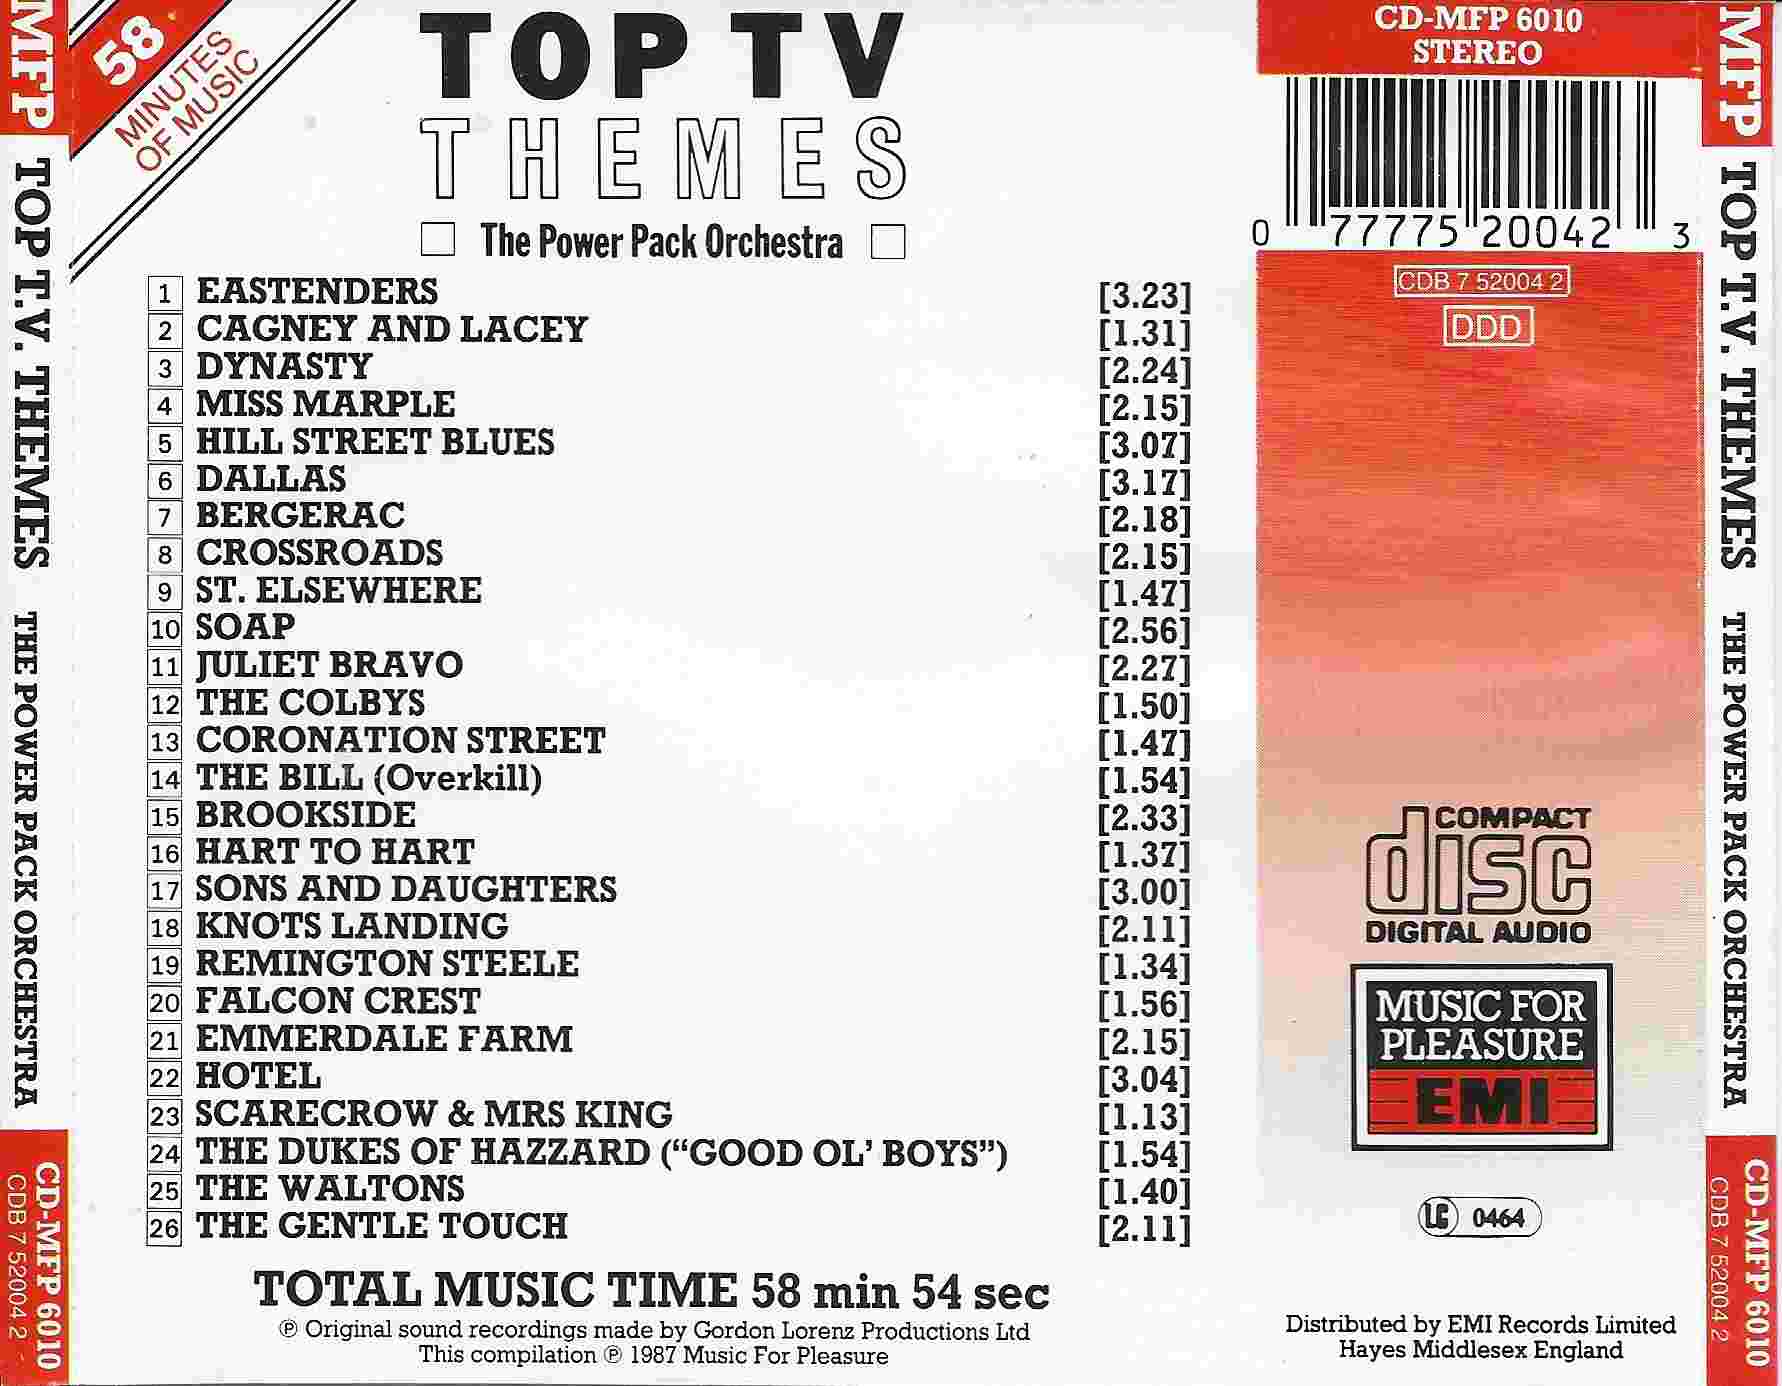 Picture of CDMFP 6010 Top TV themes by artist Various from ITV, Channel 4 and Channel 5 library